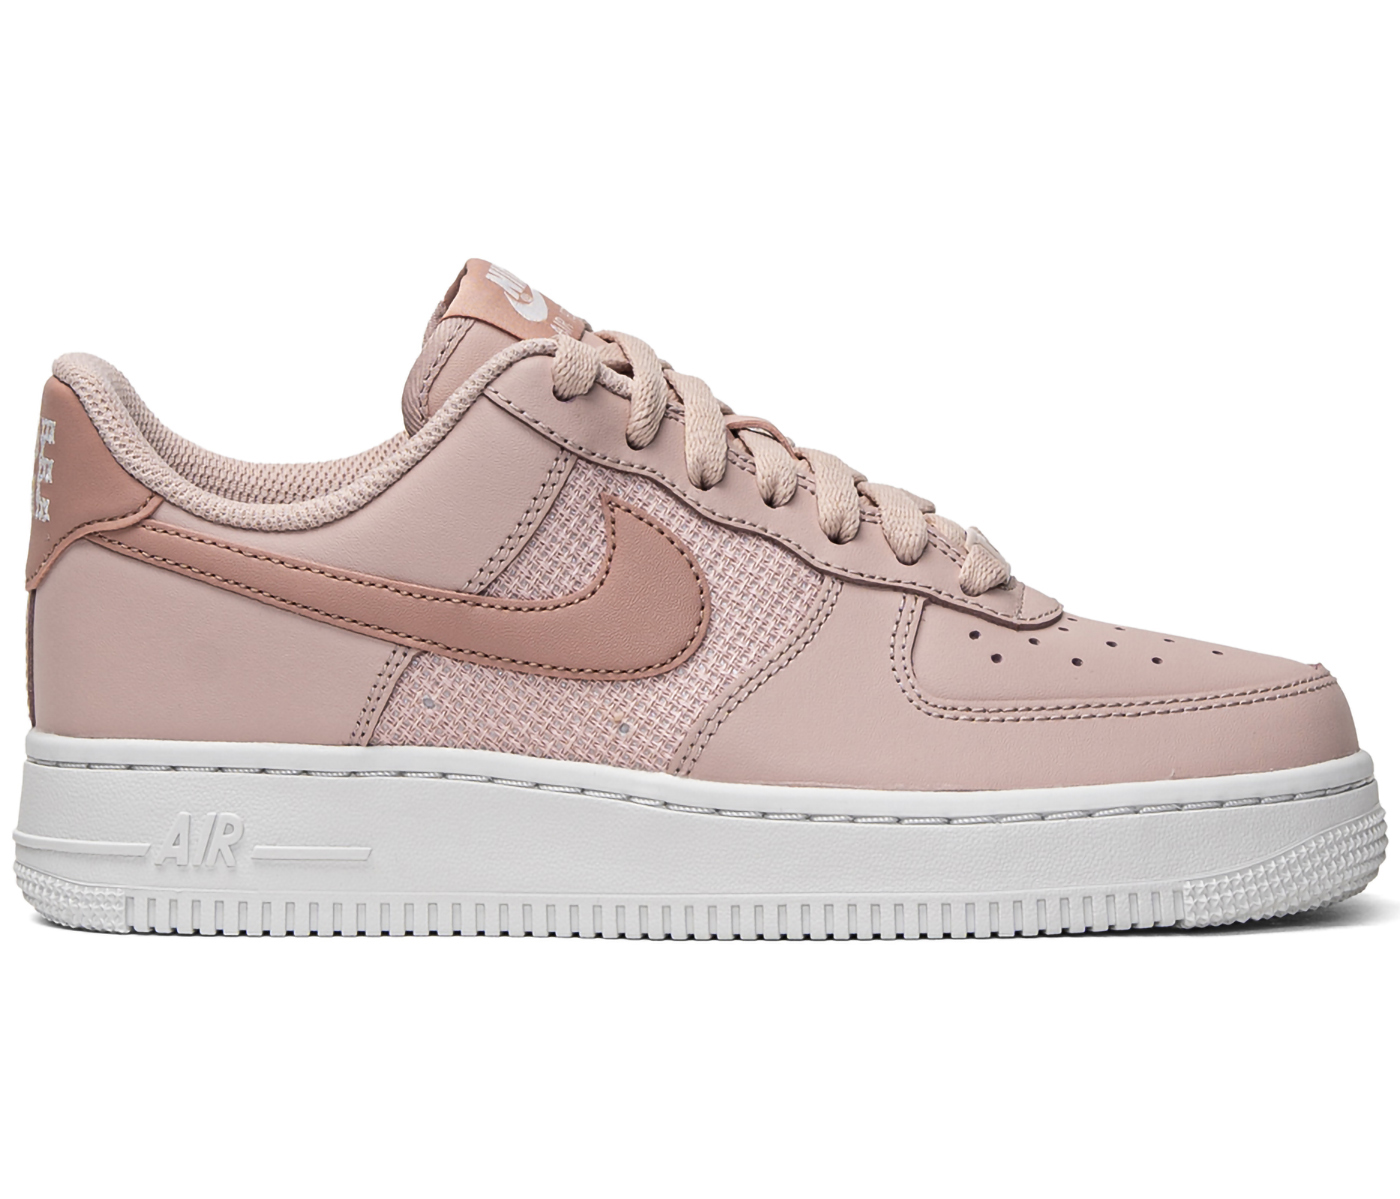 Nike Air Force 1 Low '07 ESS Cross Stitch Pink Oxford (Women's